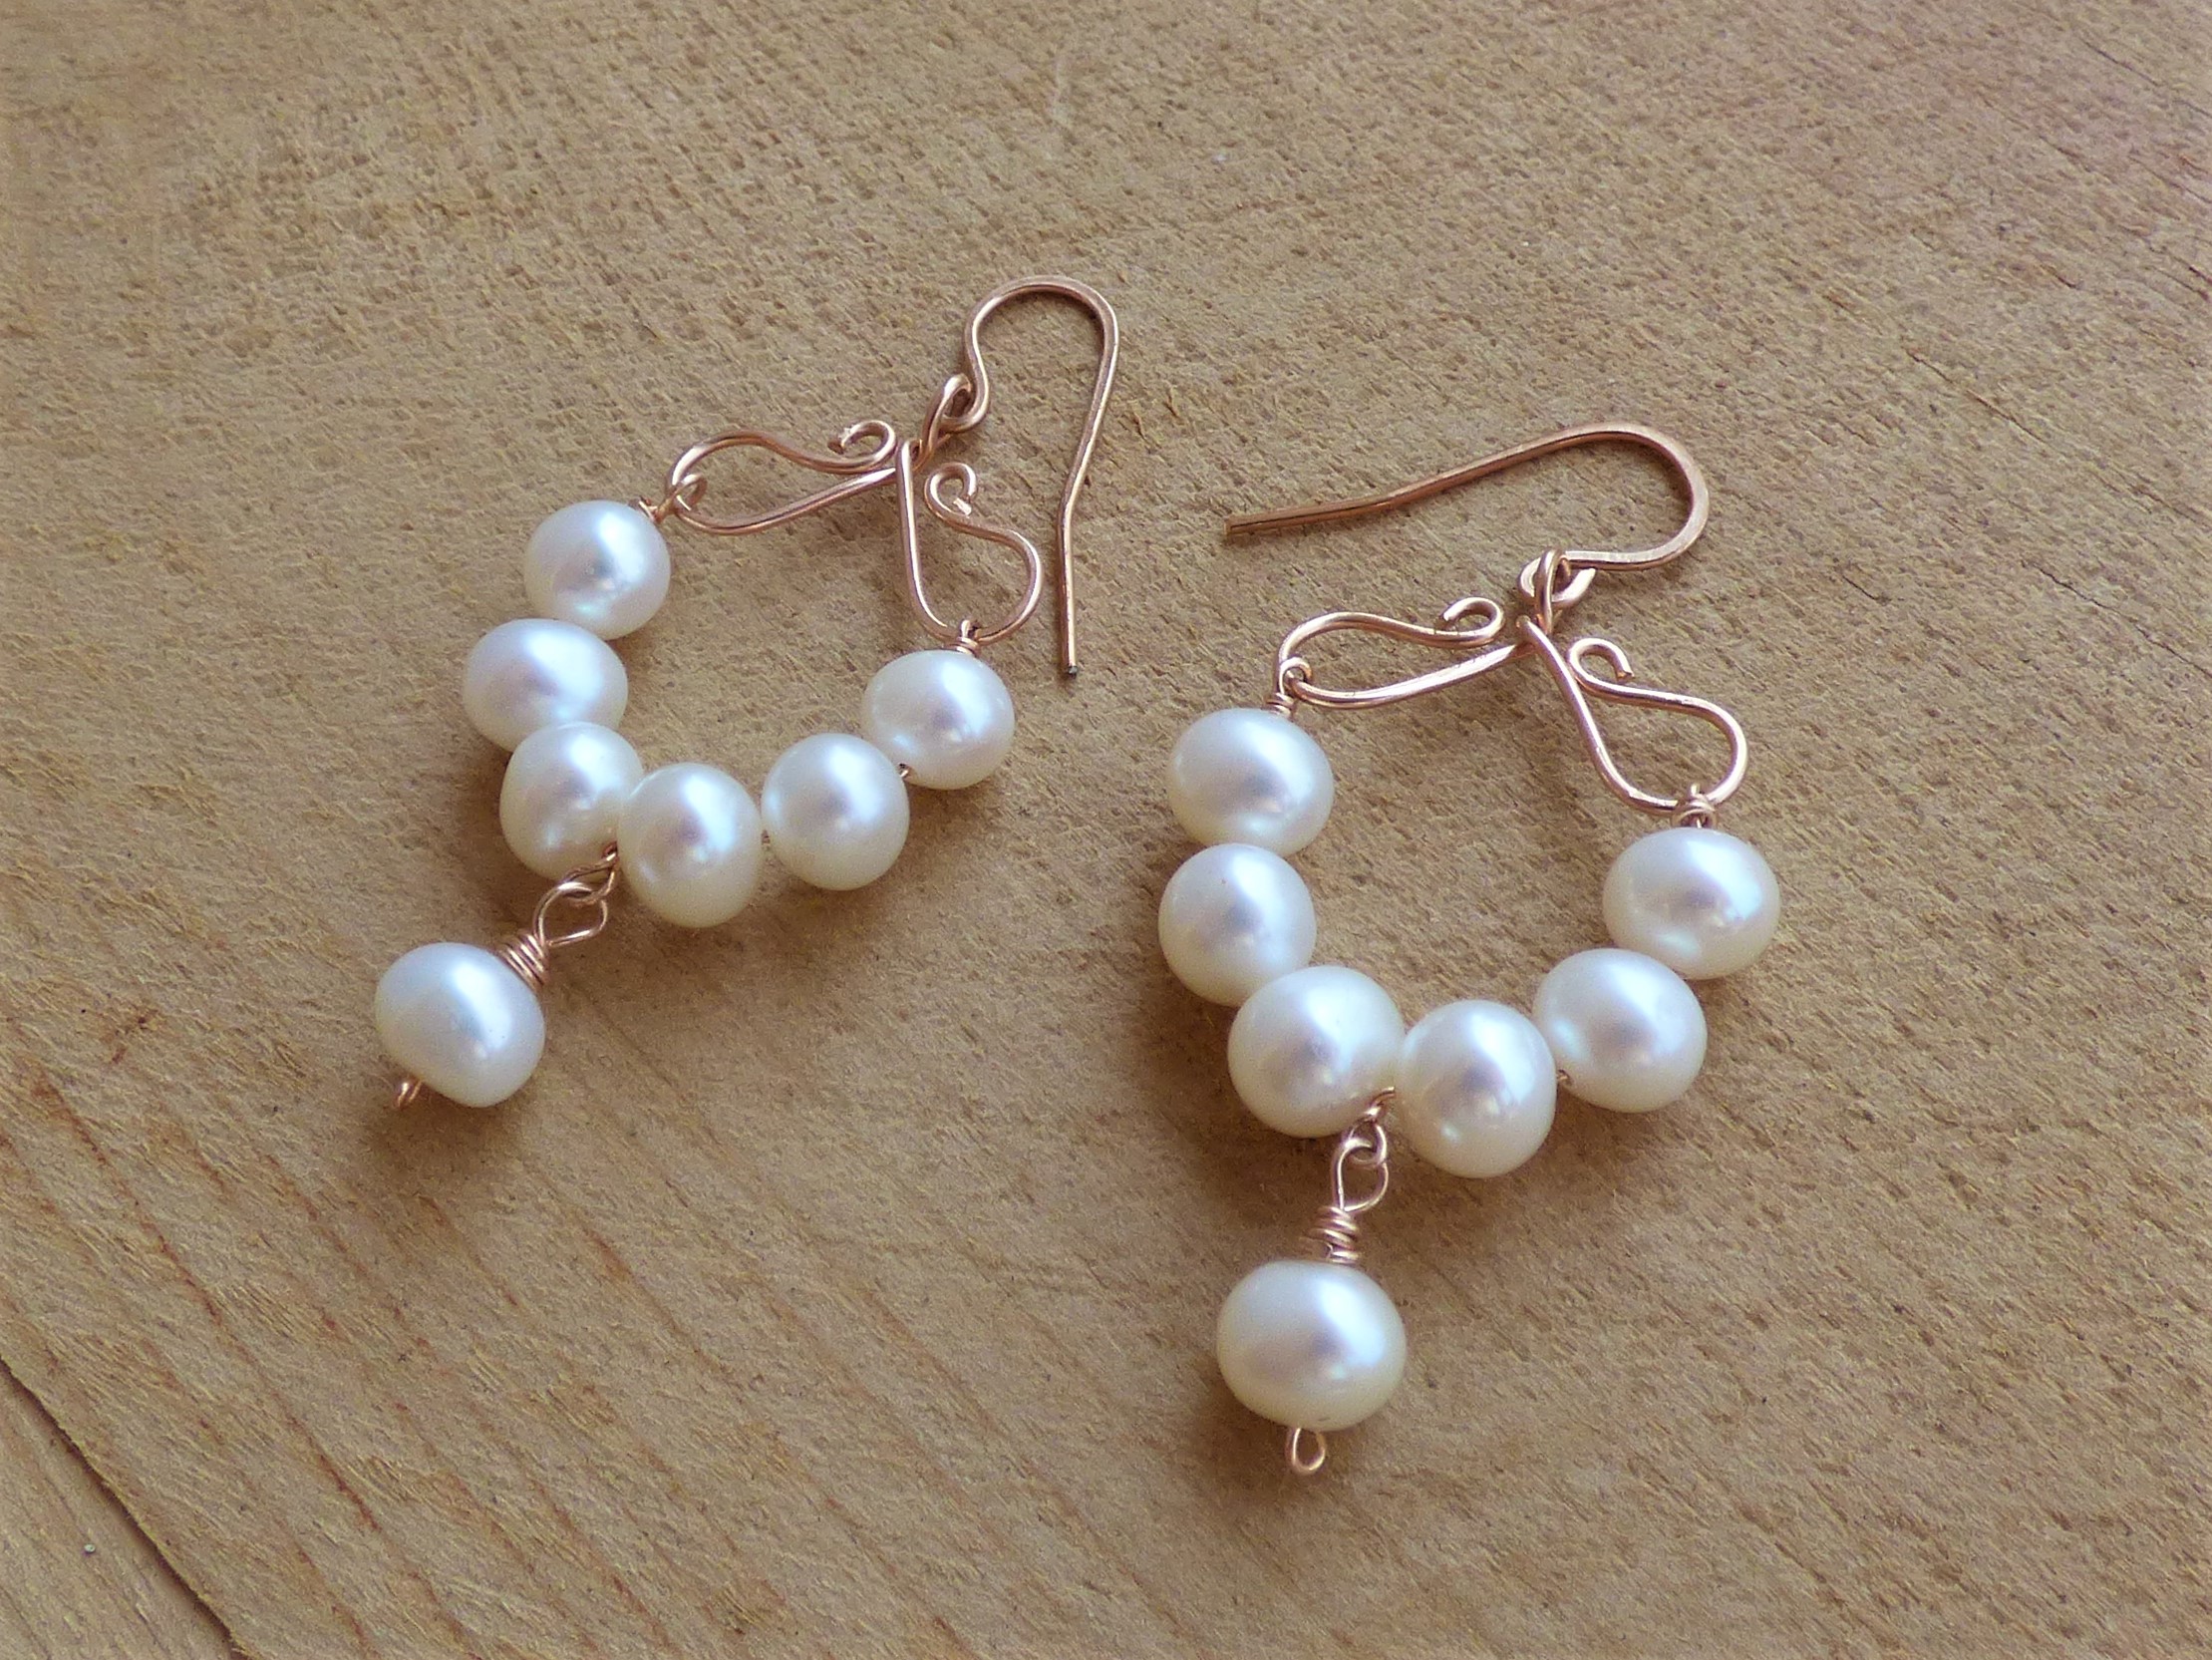 White Freshwater Pearl Drop Earrings Wire Wrapped in Gold Filled Wire A. Regular Earwire